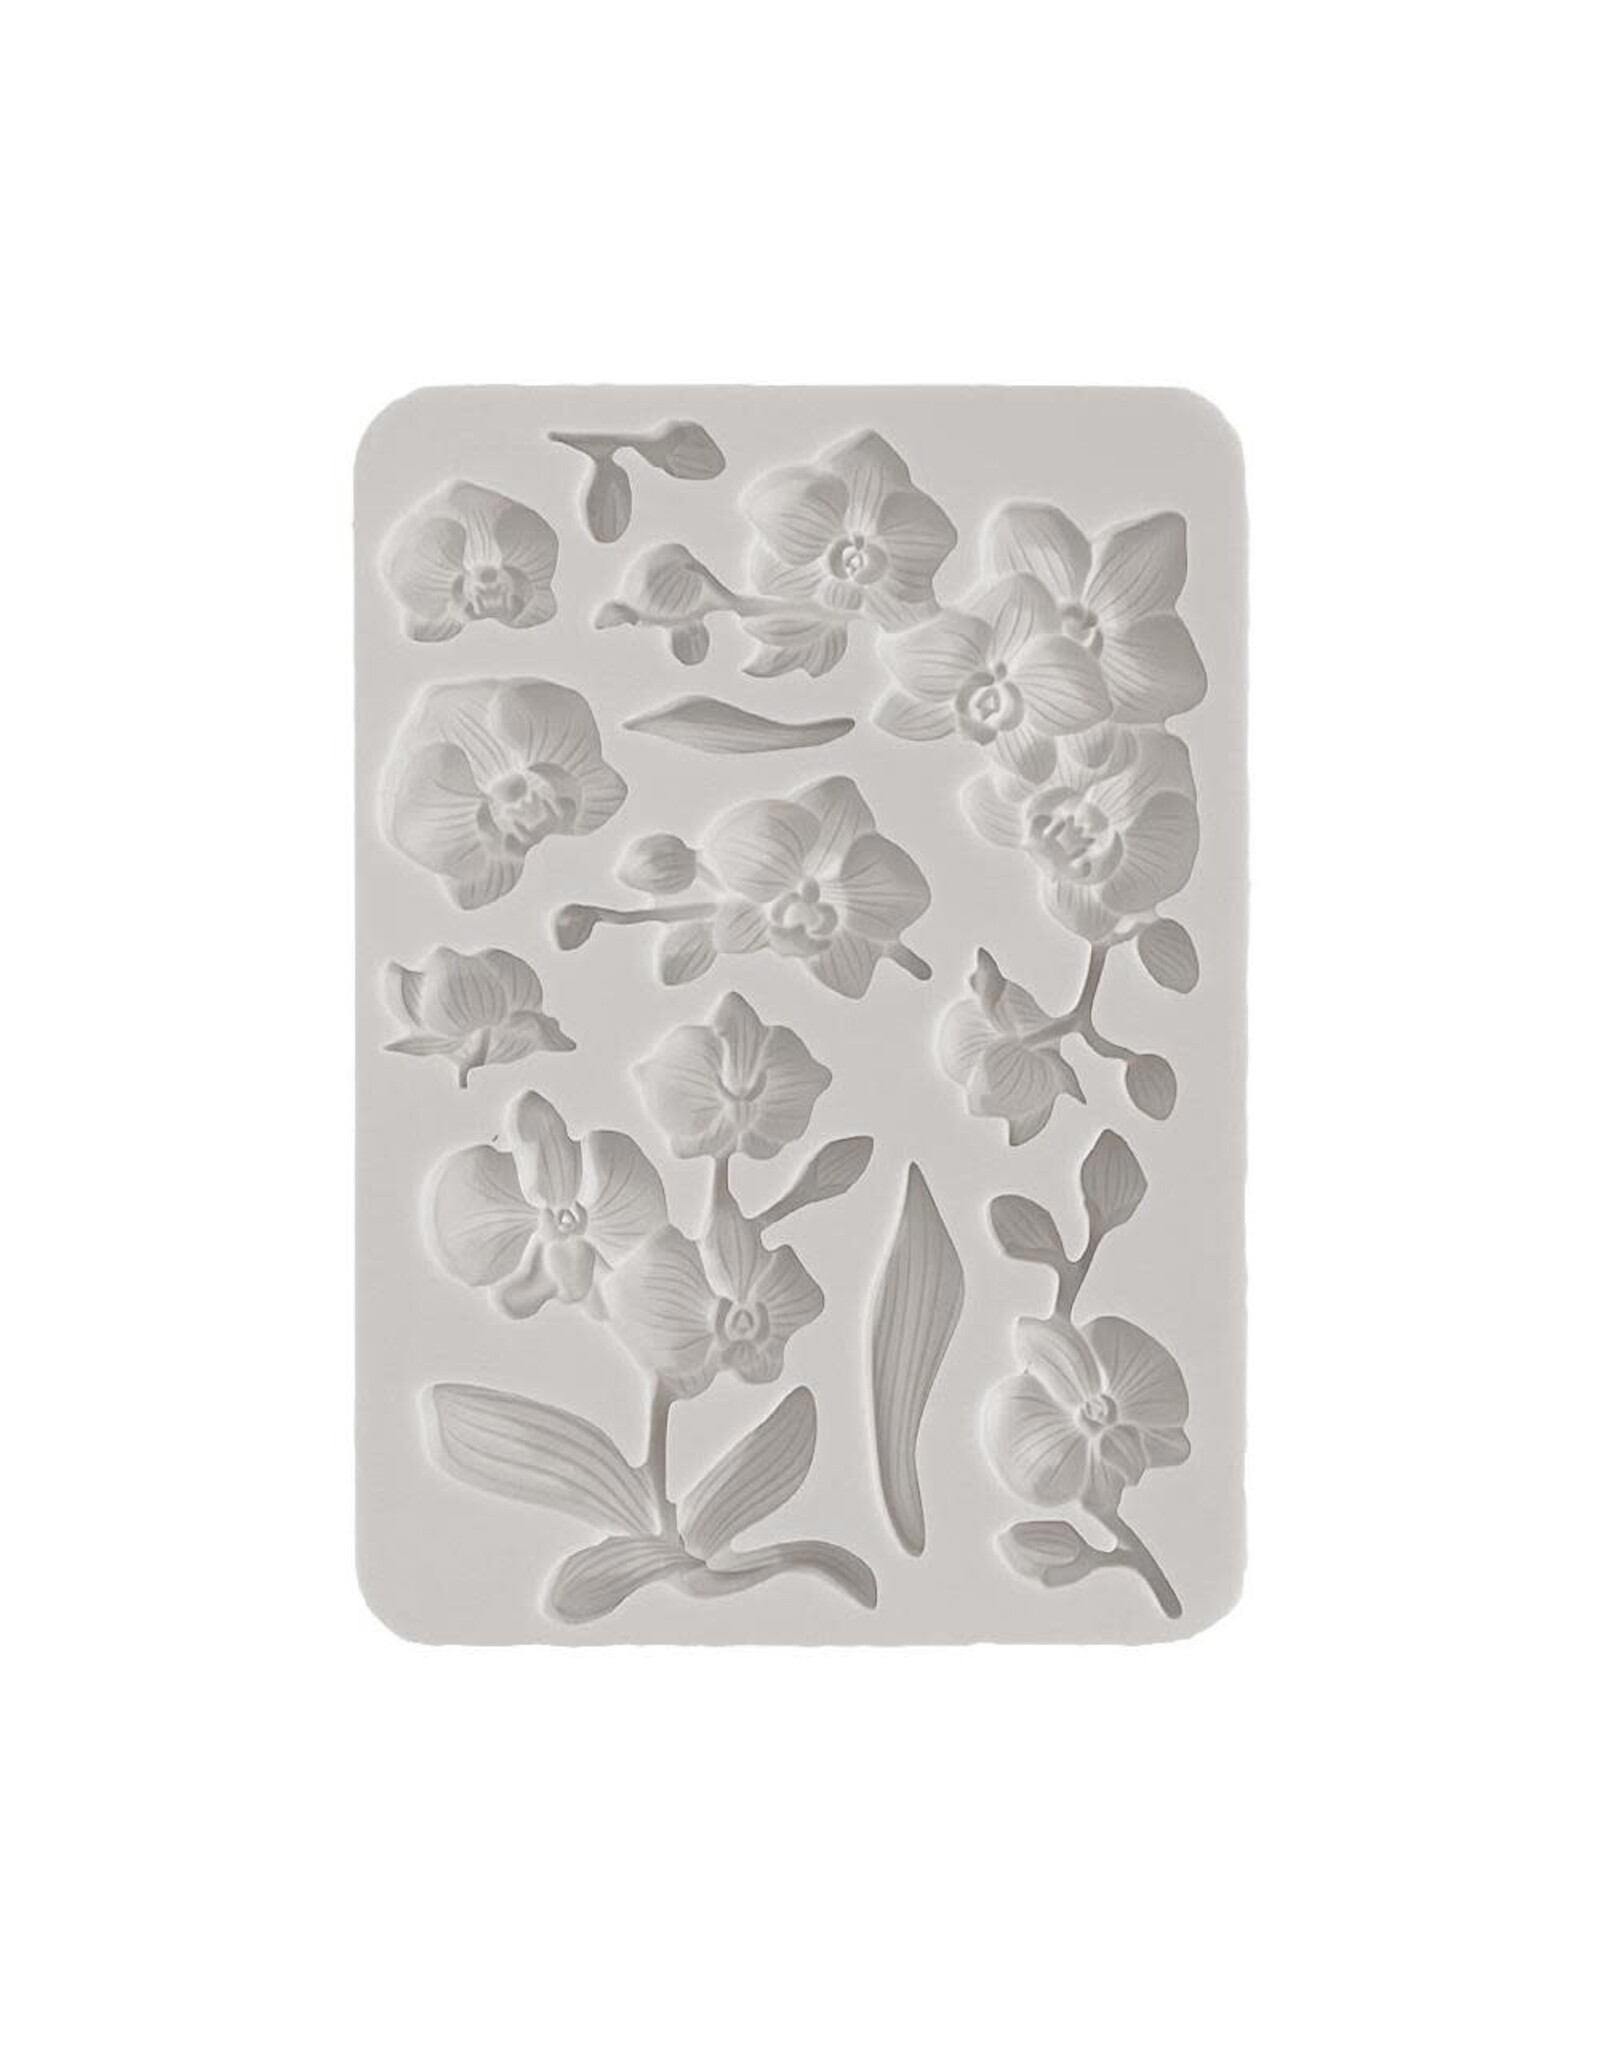 STAMPERIA STAMPERIA ORCHIDS AND CATS ORCHIDS A5 SILICON MOULD